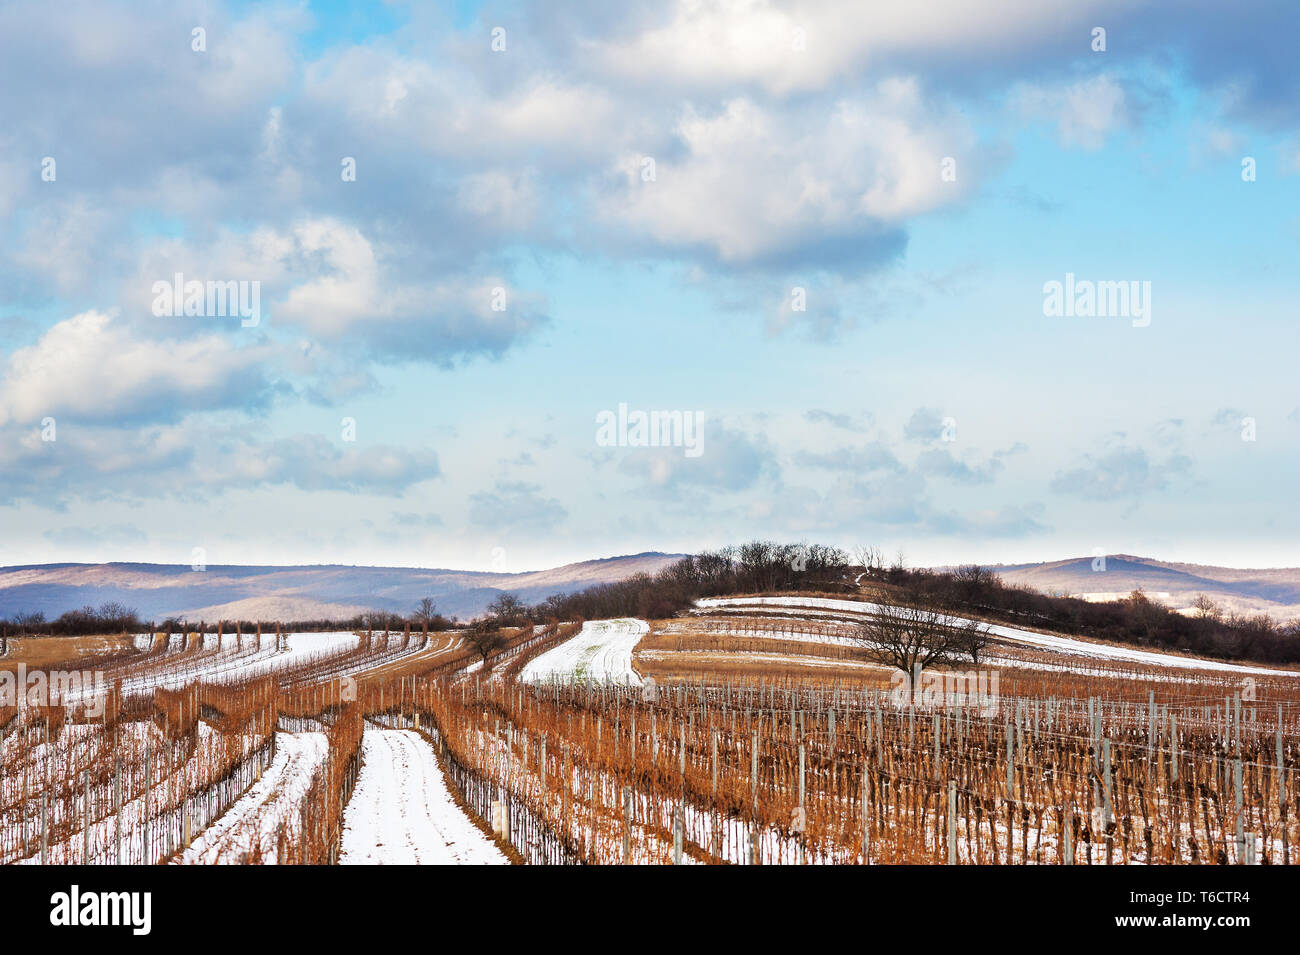 Vineyard in Burgenland in winter with snow Stock Photo